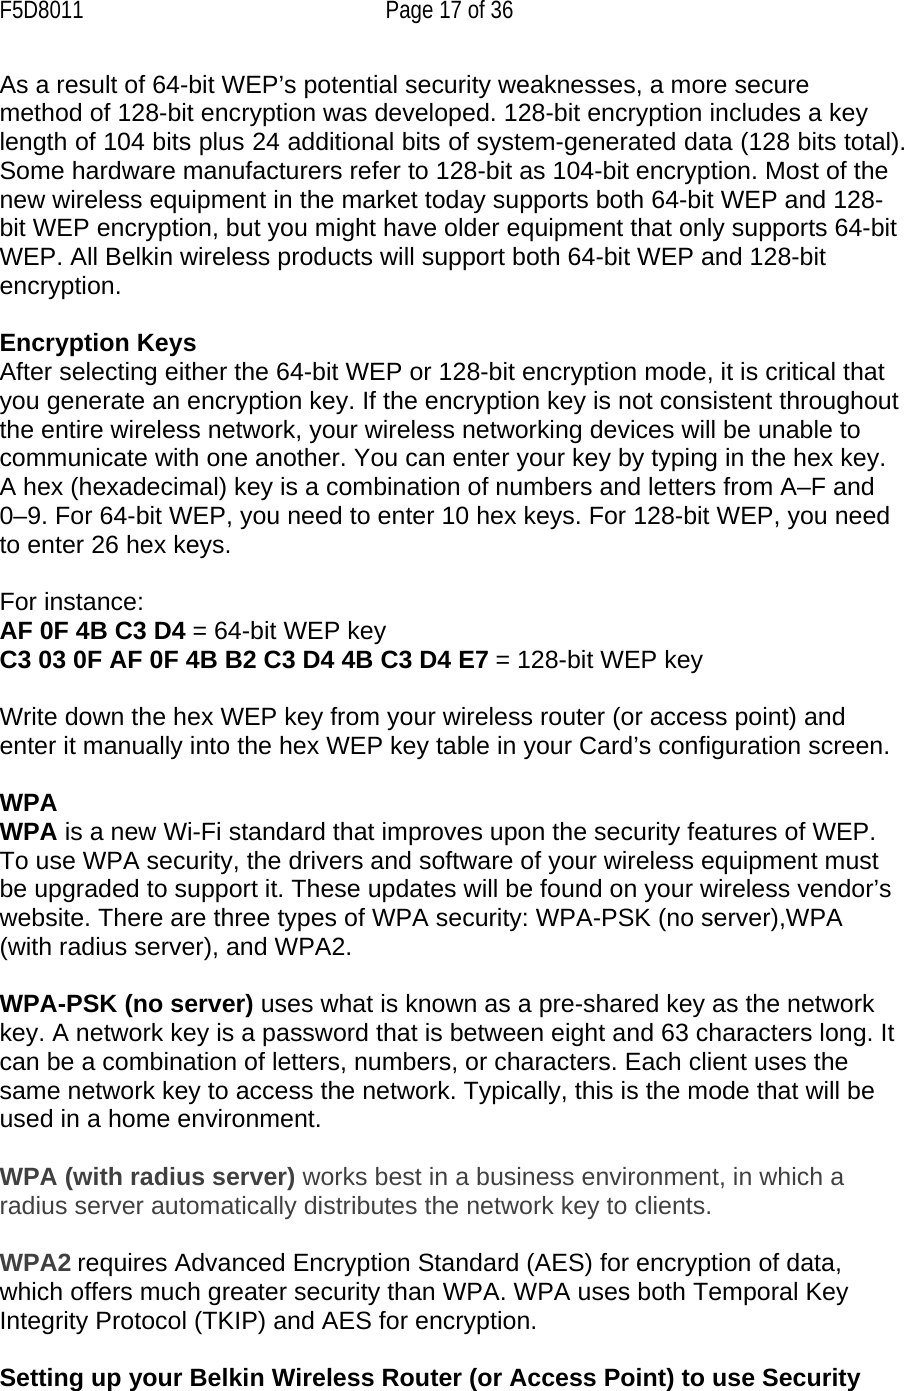 F5D8011  Page 17 of 36 As a result of 64-bit WEP’s potential security weaknesses, a more secure method of 128-bit encryption was developed. 128-bit encryption includes a key length of 104 bits plus 24 additional bits of system-generated data (128 bits total). Some hardware manufacturers refer to 128-bit as 104-bit encryption. Most of the new wireless equipment in the market today supports both 64-bit WEP and 128-bit WEP encryption, but you might have older equipment that only supports 64-bit WEP. All Belkin wireless products will support both 64-bit WEP and 128-bit encryption.   Encryption Keys  After selecting either the 64-bit WEP or 128-bit encryption mode, it is critical that you generate an encryption key. If the encryption key is not consistent throughout the entire wireless network, your wireless networking devices will be unable to communicate with one another. You can enter your key by typing in the hex key. A hex (hexadecimal) key is a combination of numbers and letters from A–F and 0–9. For 64-bit WEP, you need to enter 10 hex keys. For 128-bit WEP, you need to enter 26 hex keys.   For instance:  AF 0F 4B C3 D4 = 64-bit WEP key  C3 03 0F AF 0F 4B B2 C3 D4 4B C3 D4 E7 = 128-bit WEP key   Write down the hex WEP key from your wireless router (or access point) and enter it manually into the hex WEP key table in your Card’s configuration screen.  WPA  WPA is a new Wi-Fi standard that improves upon the security features of WEP. To use WPA security, the drivers and software of your wireless equipment must be upgraded to support it. These updates will be found on your wireless vendor’s website. There are three types of WPA security: WPA-PSK (no server),WPA (with radius server), and WPA2.  WPA-PSK (no server) uses what is known as a pre-shared key as the network key. A network key is a password that is between eight and 63 characters long. It can be a combination of letters, numbers, or characters. Each client uses the same network key to access the network. Typically, this is the mode that will be used in a home environment.   WPA (with radius server) works best in a business environment, in which a radius server automatically distributes the network key to clients.   WPA2 requires Advanced Encryption Standard (AES) for encryption of data, which offers much greater security than WPA. WPA uses both Temporal Key Integrity Protocol (TKIP) and AES for encryption.  Setting up your Belkin Wireless Router (or Access Point) to use Security 